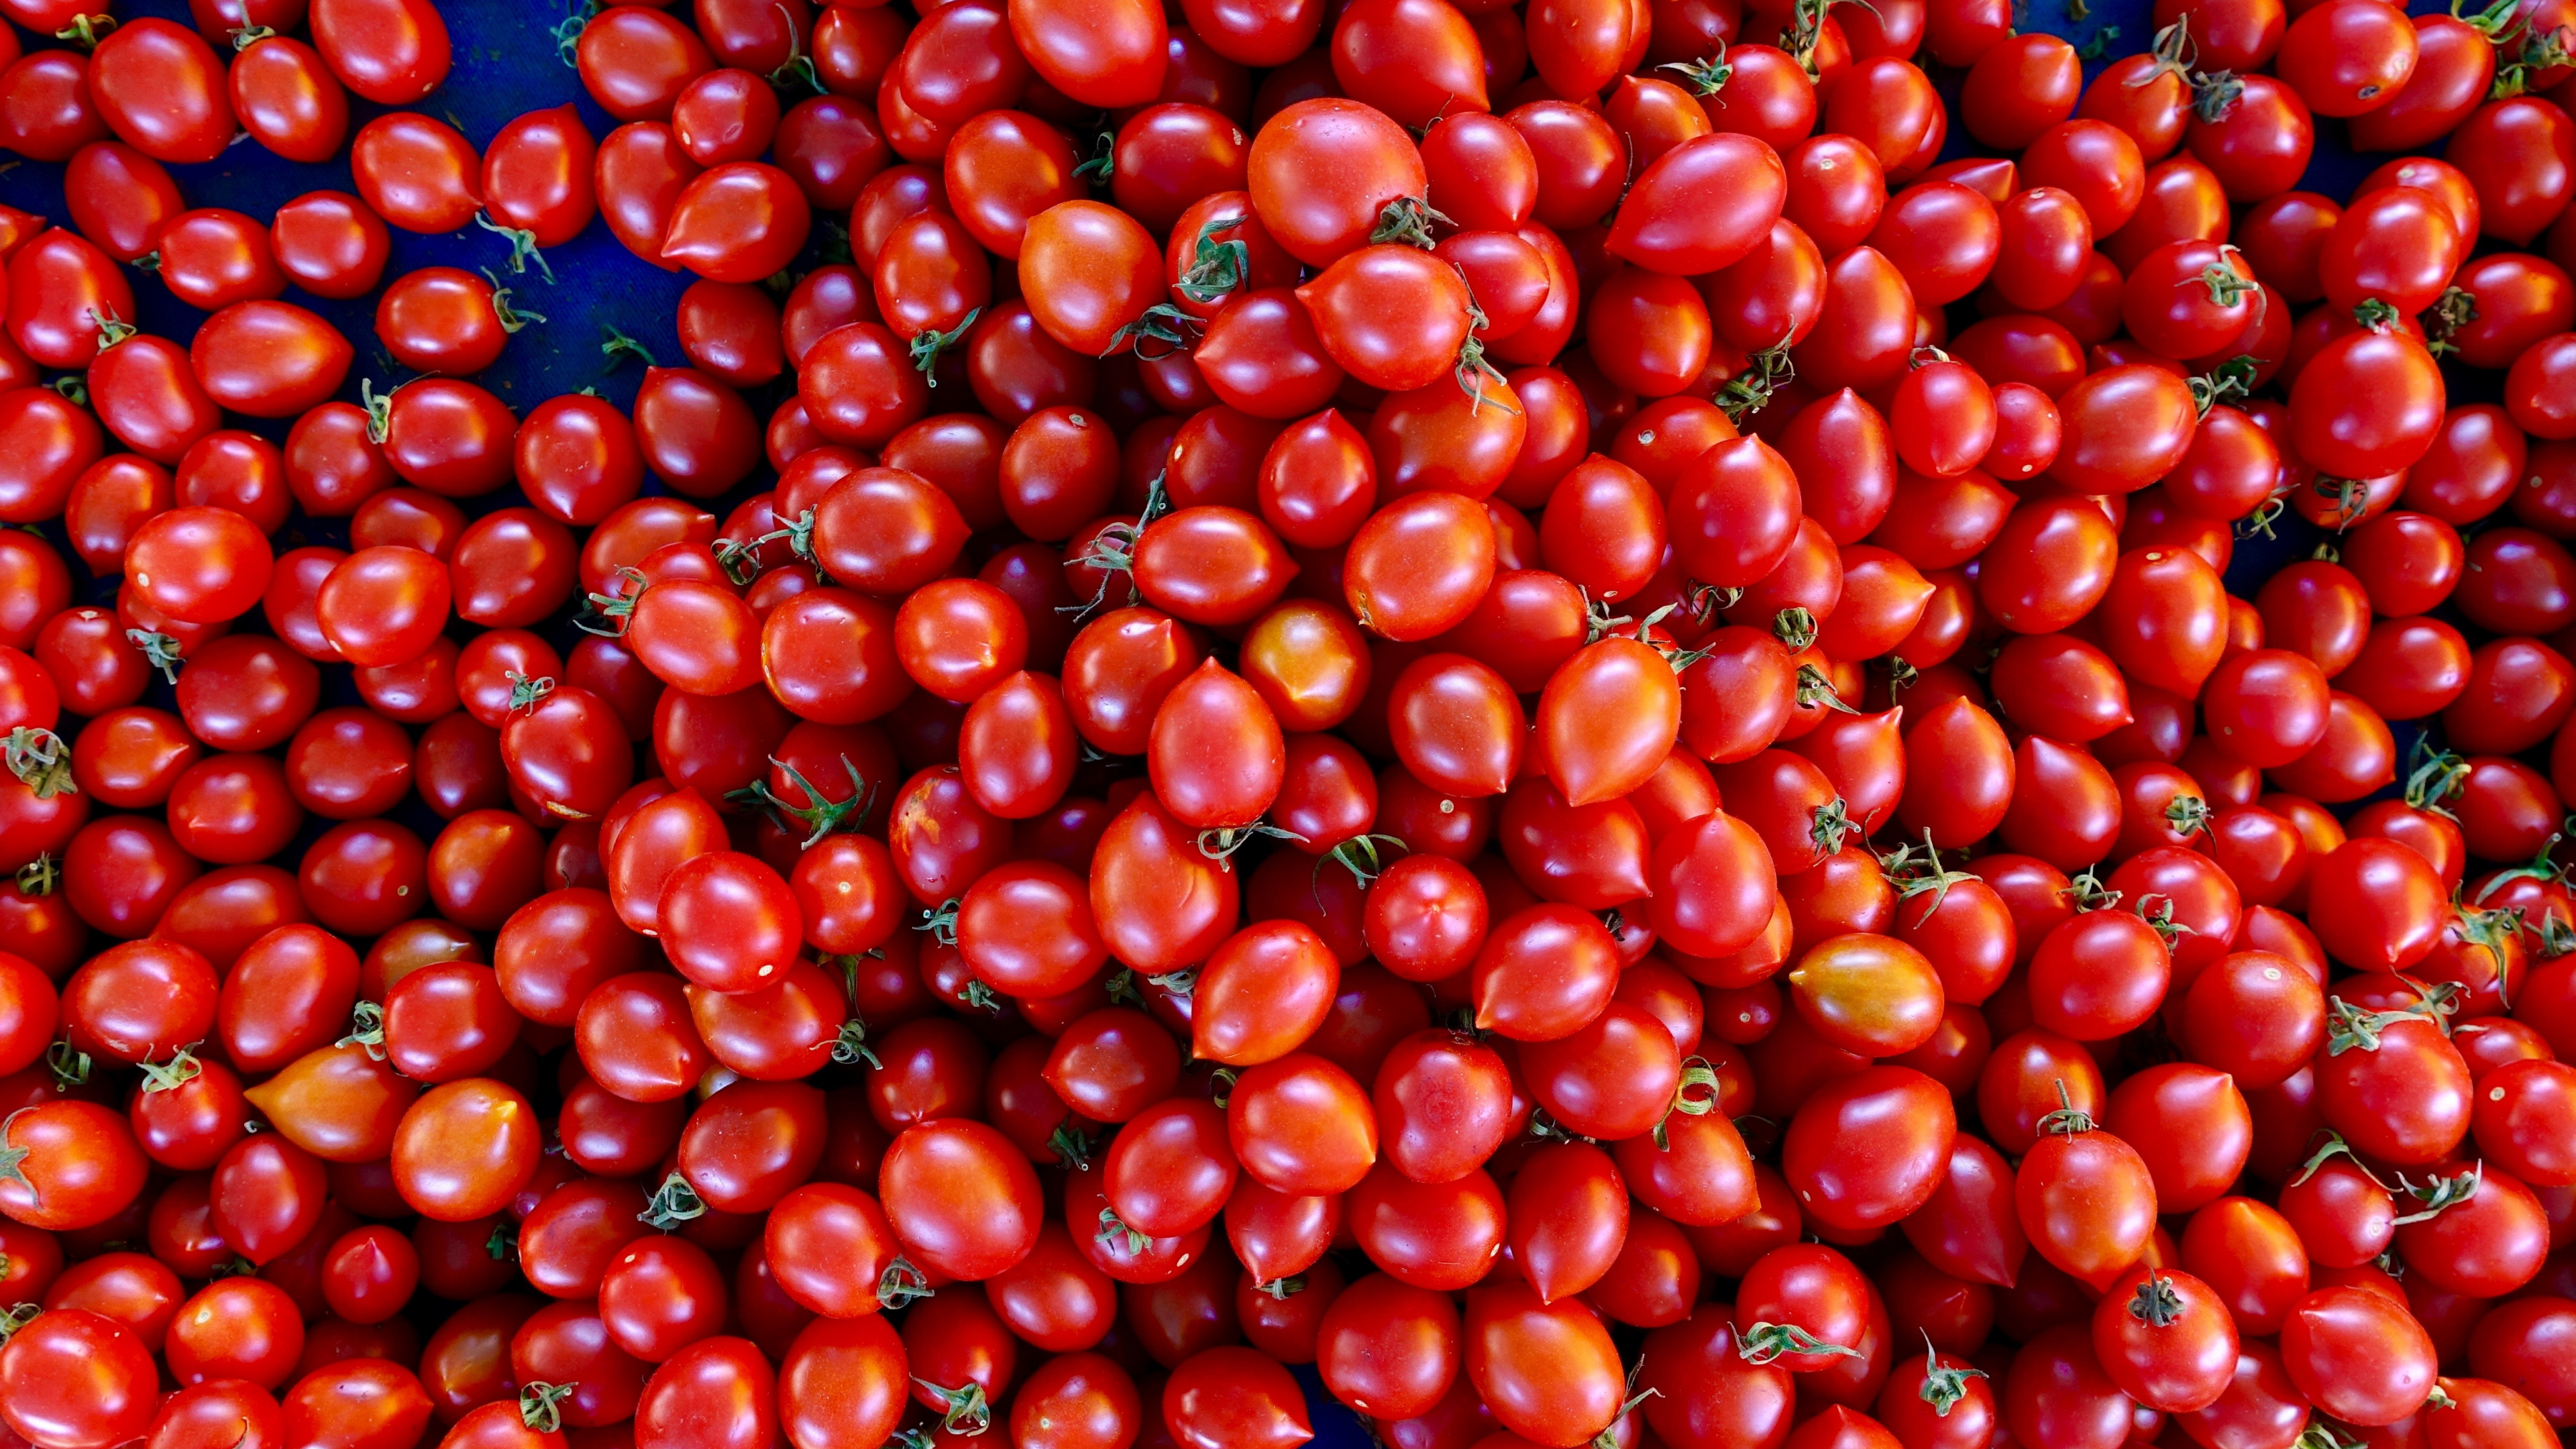 Red Round Fruits on Blue Plastic Container. Wallpaper in 3840x2160 Resolution